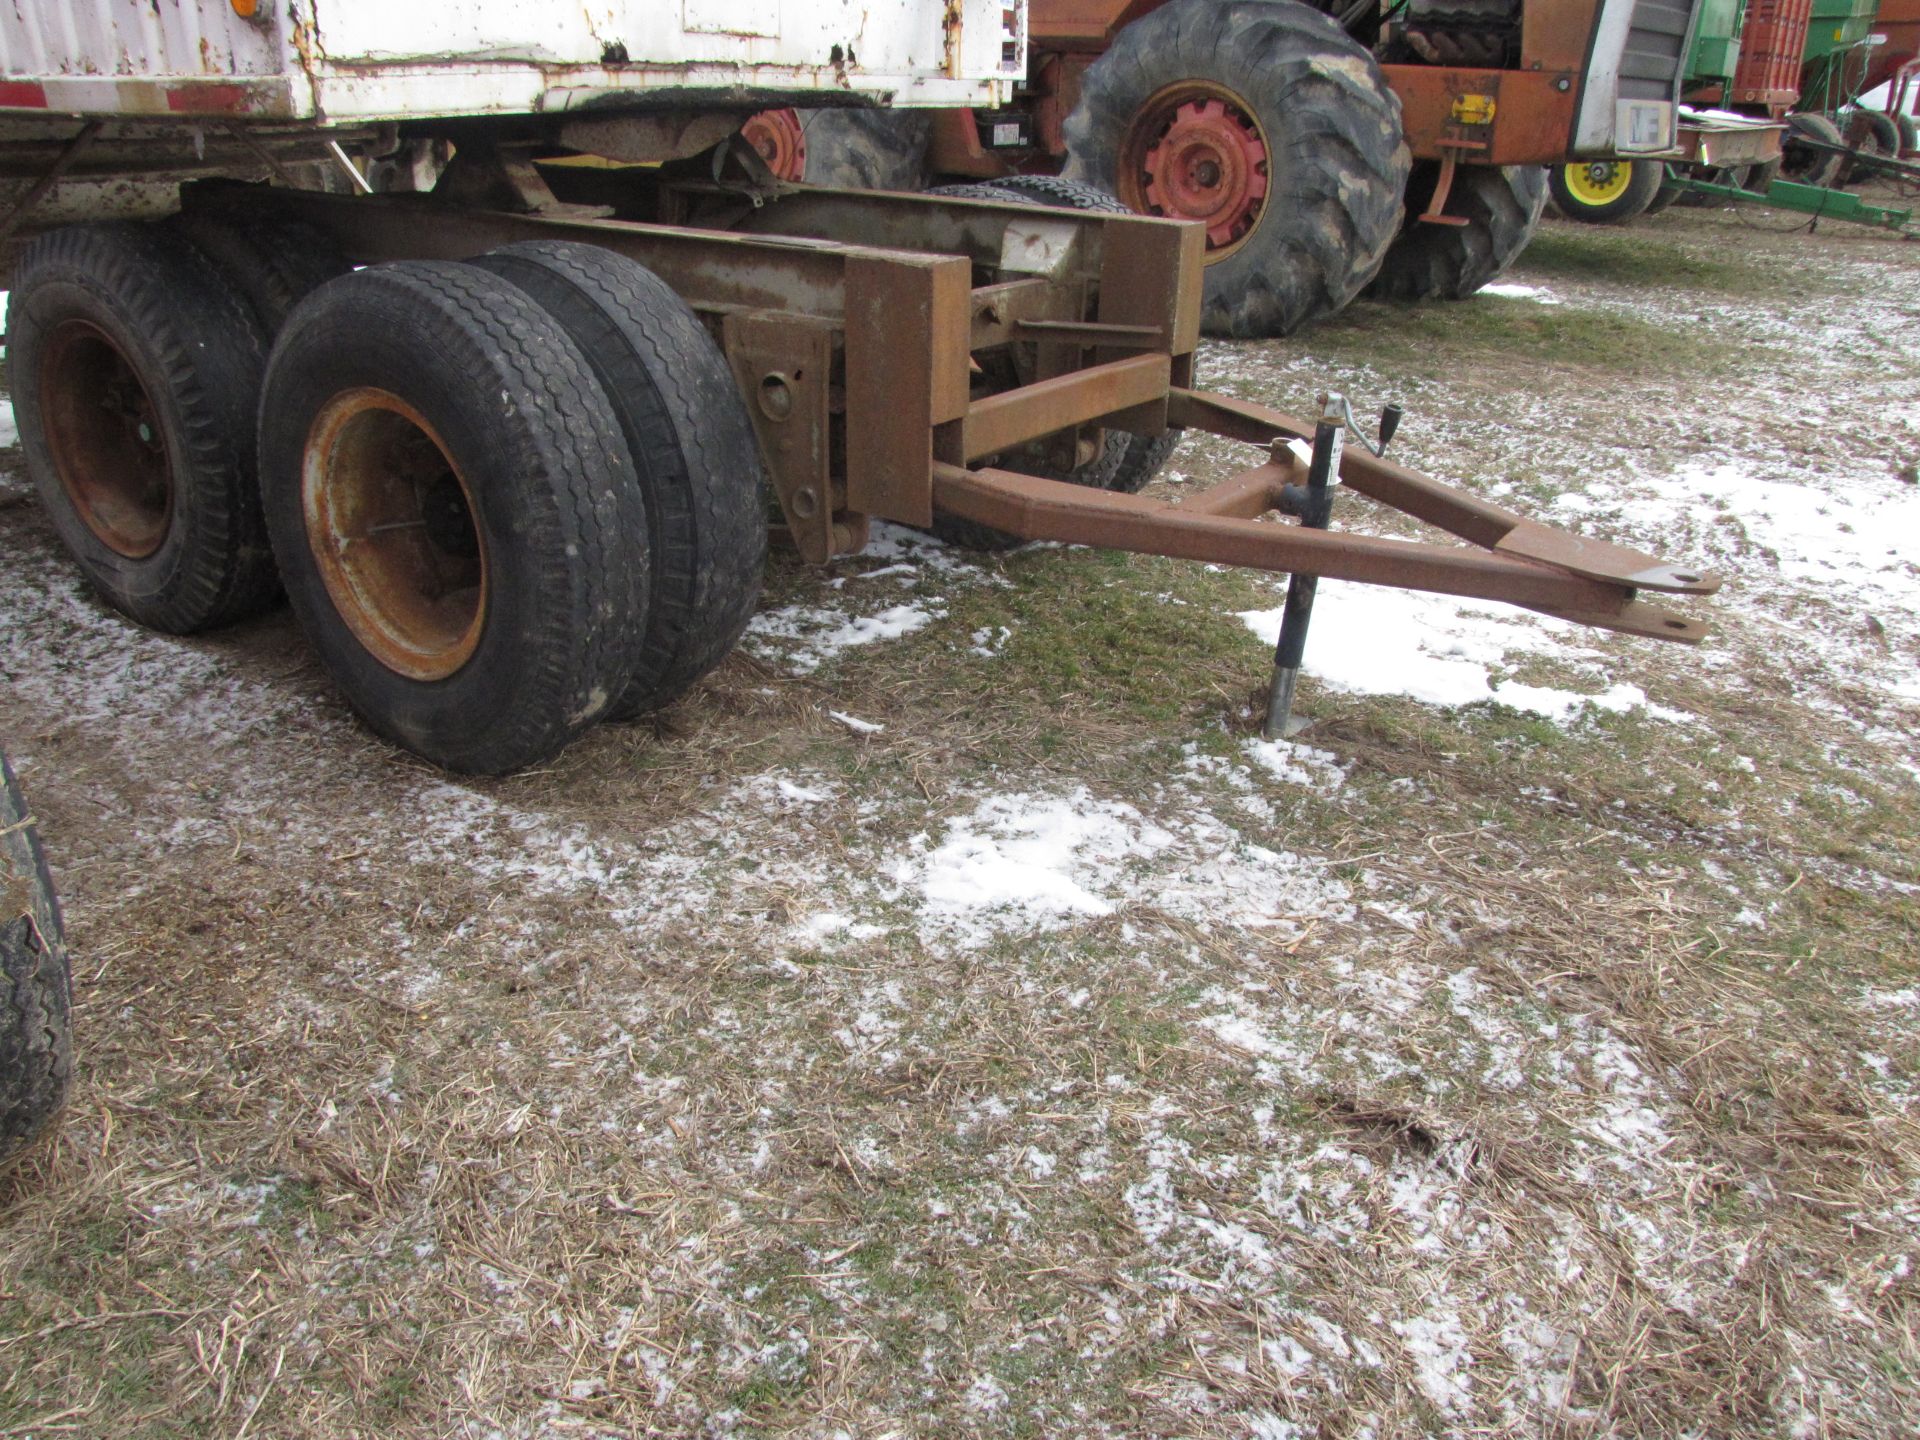 Tandem axle, pull type fifth wheel dolley